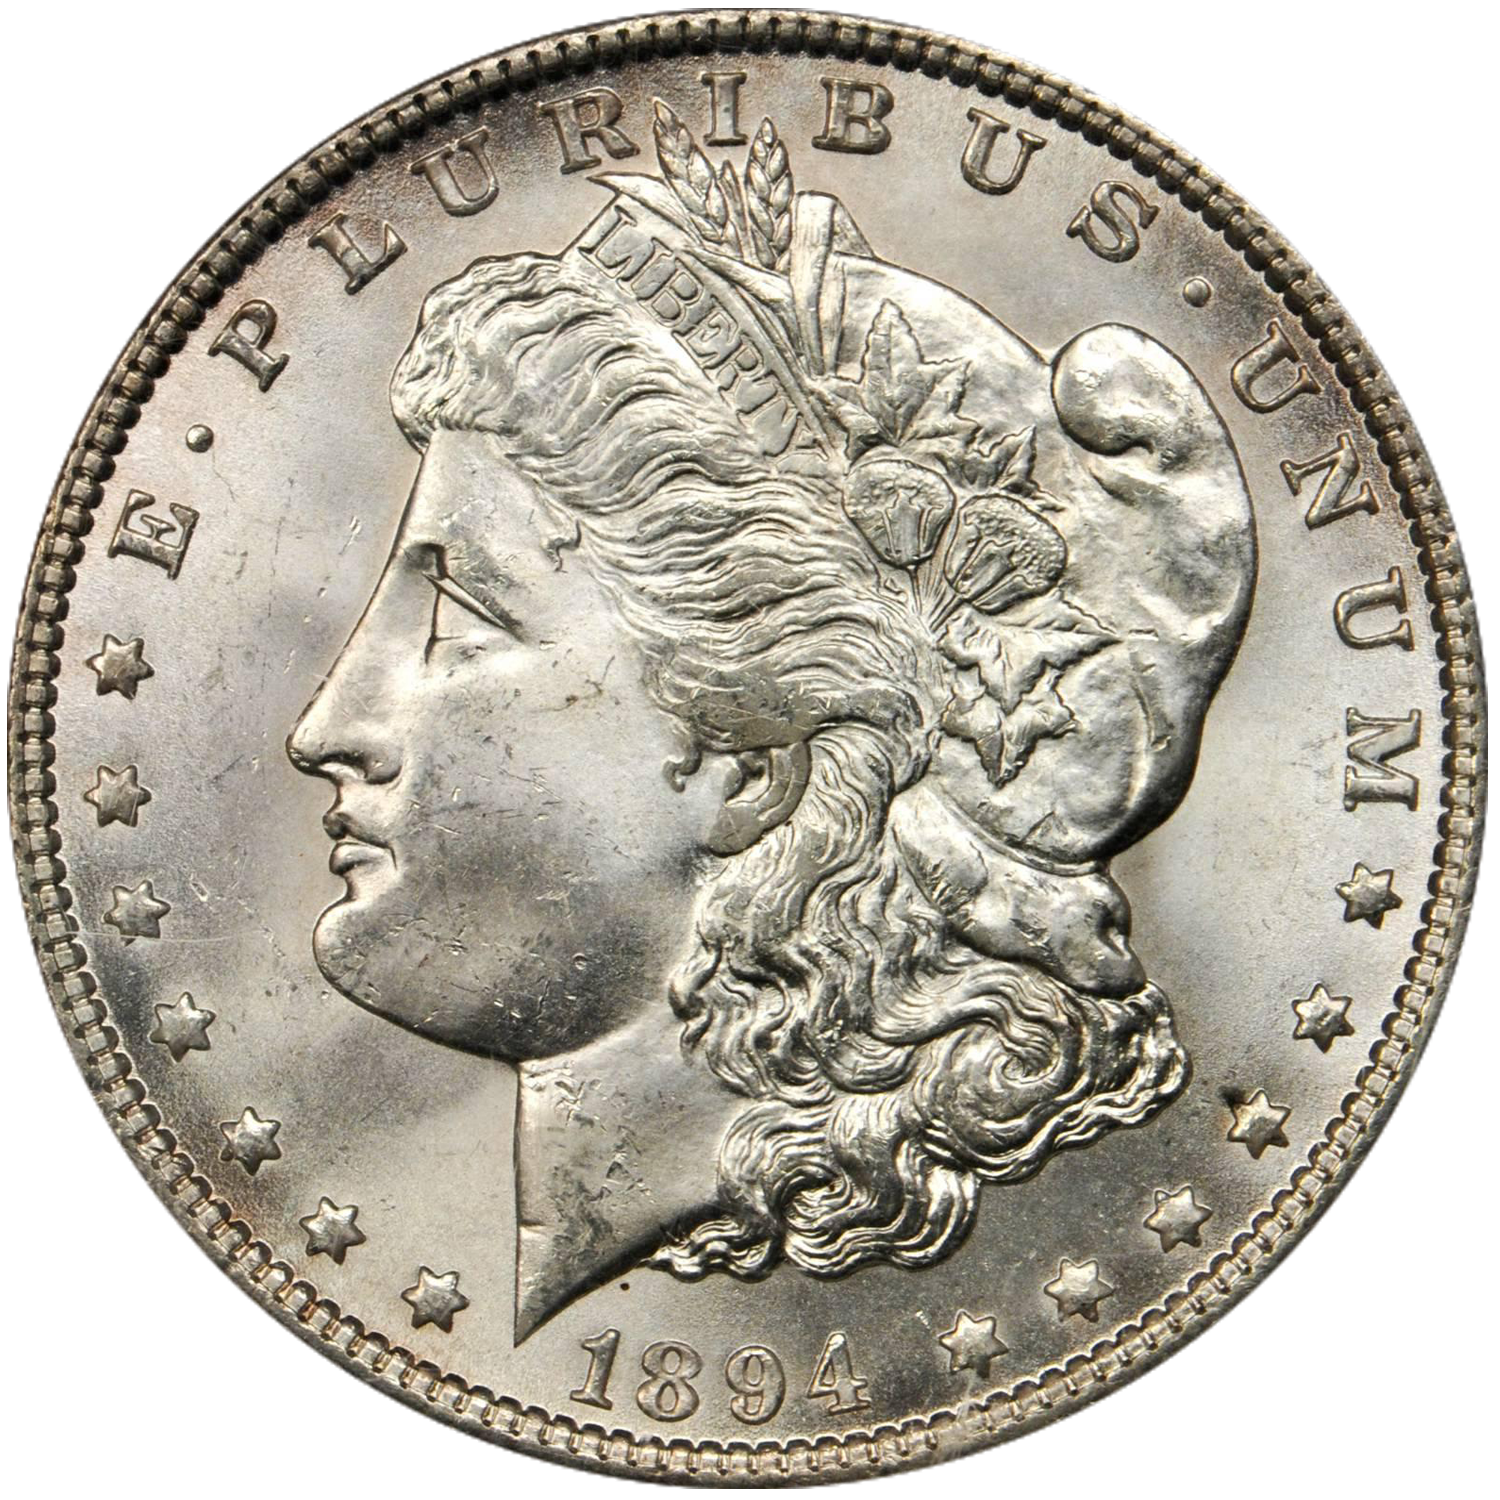 1894 new orleans morgan dollar price guide value